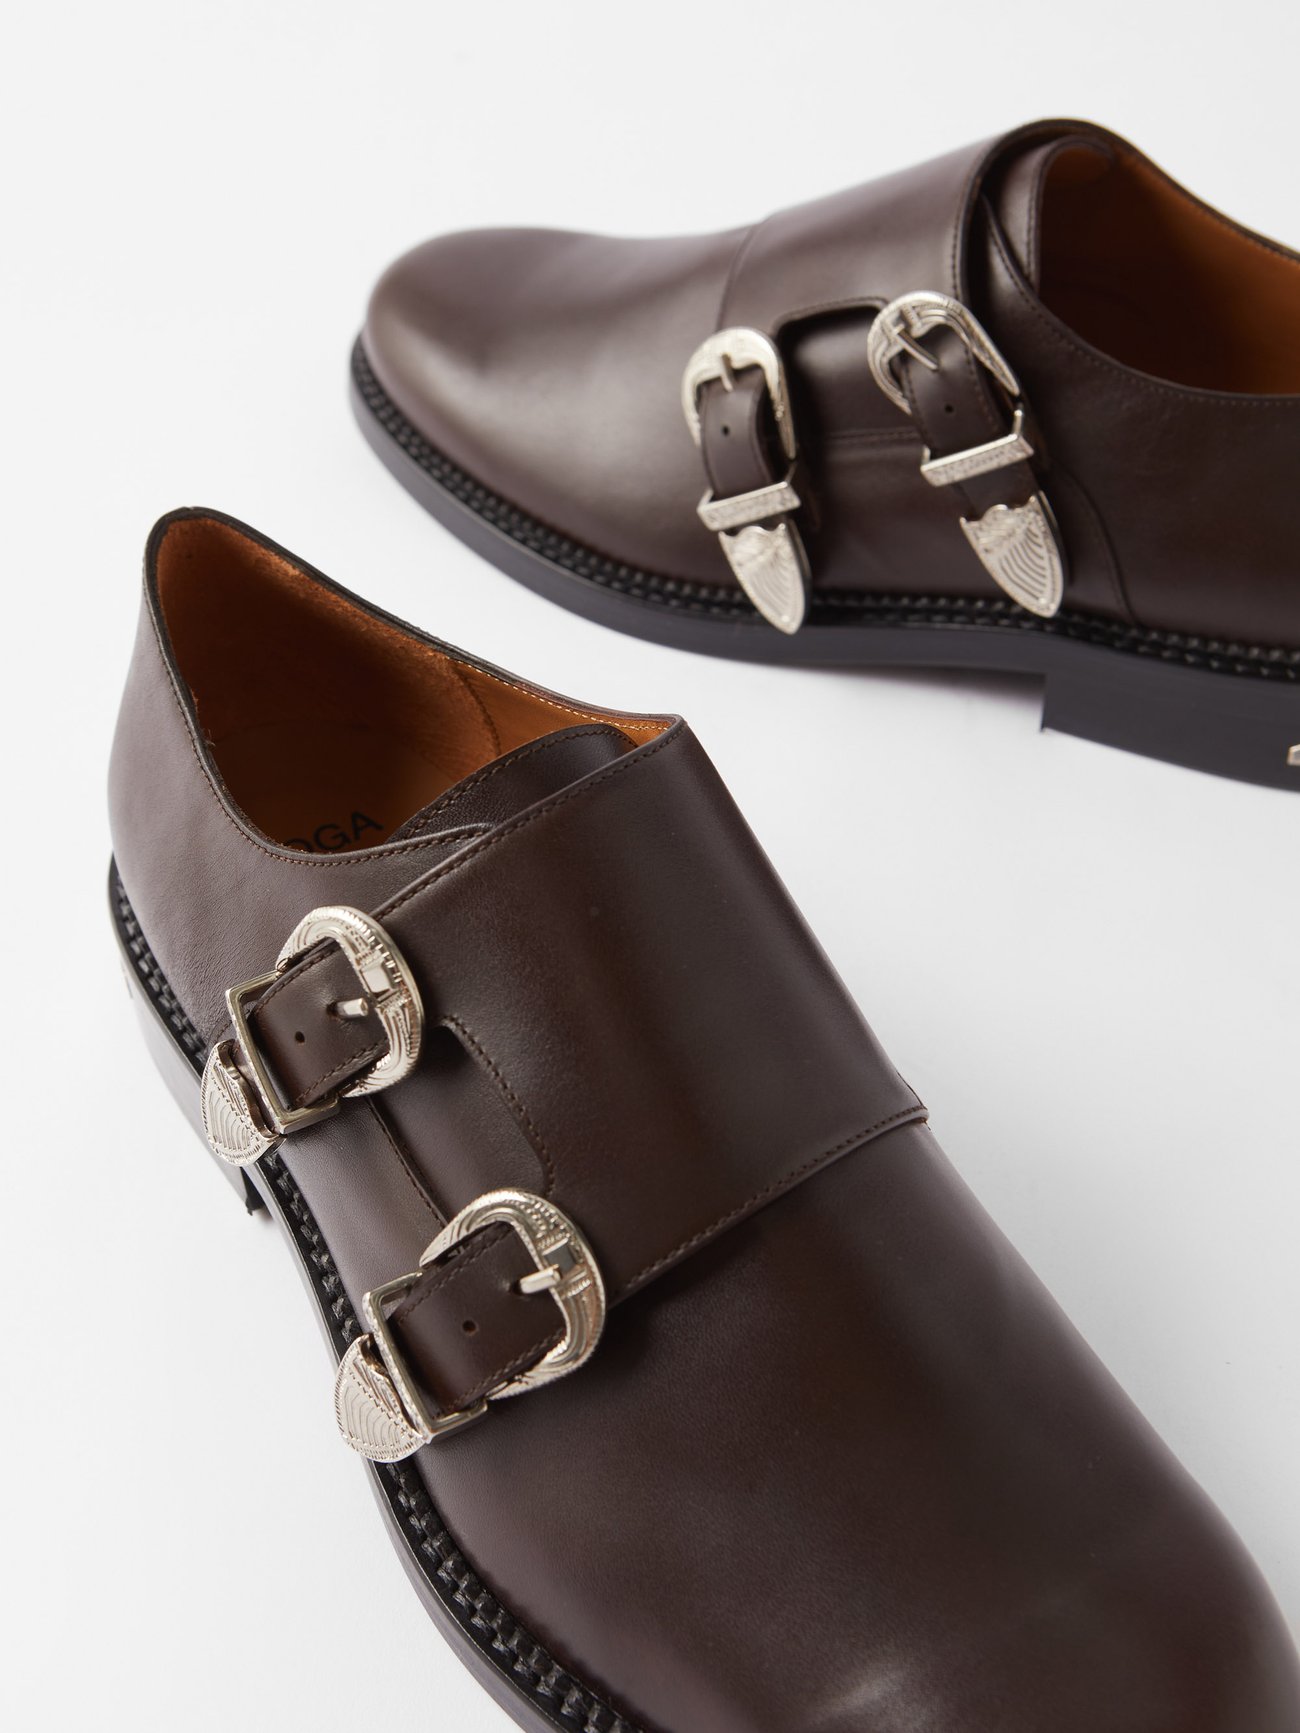 Concho-embellished leather monk shoes